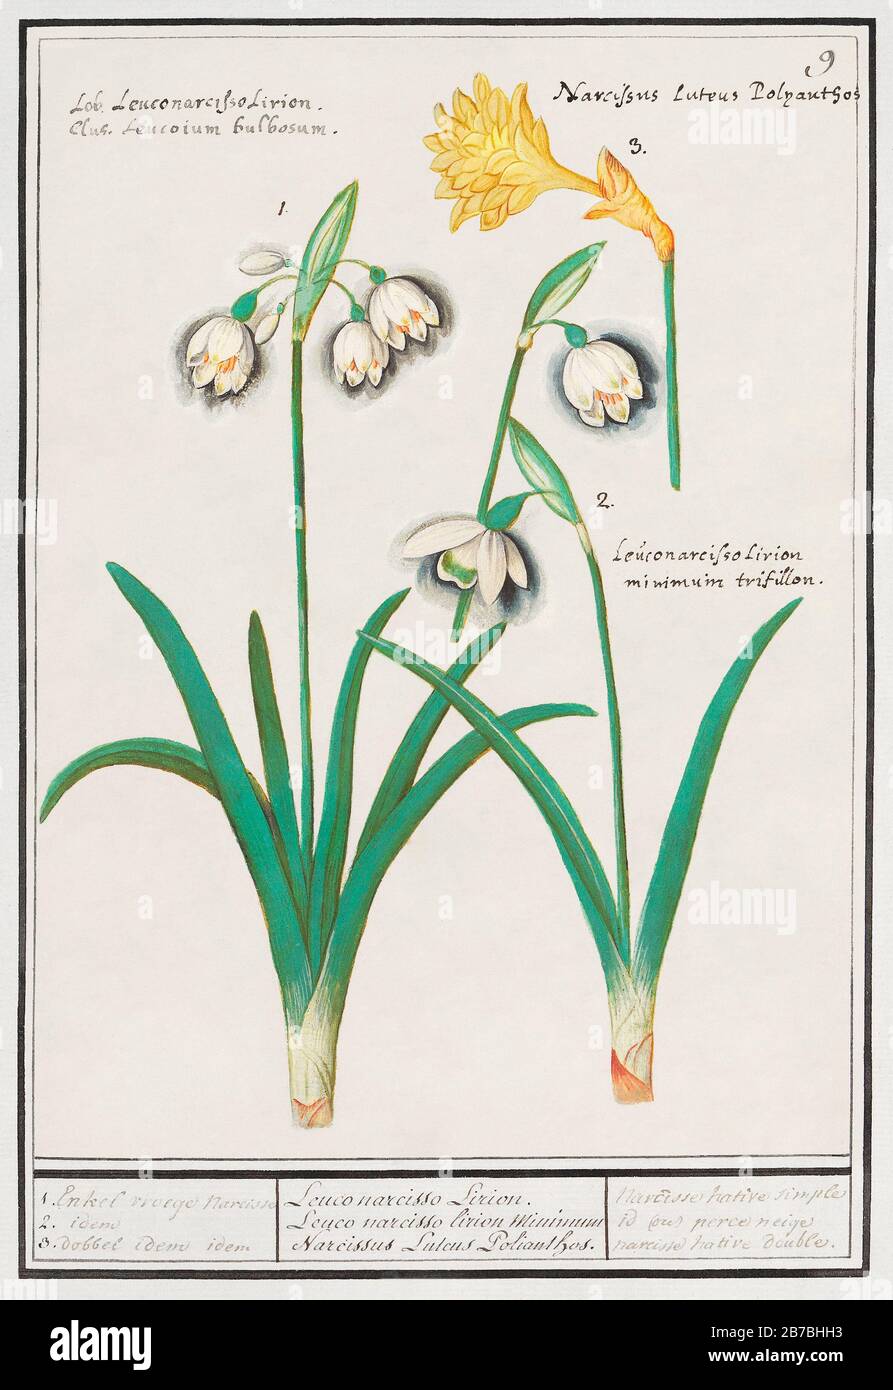 Snowdrops, galanthus, and a daffodil, narcissus (1596–1610) by Anselmus Boëtius de Boodt. Original from the Rijksmuseum. Digitally enhanced by rawpixe Stock Photo